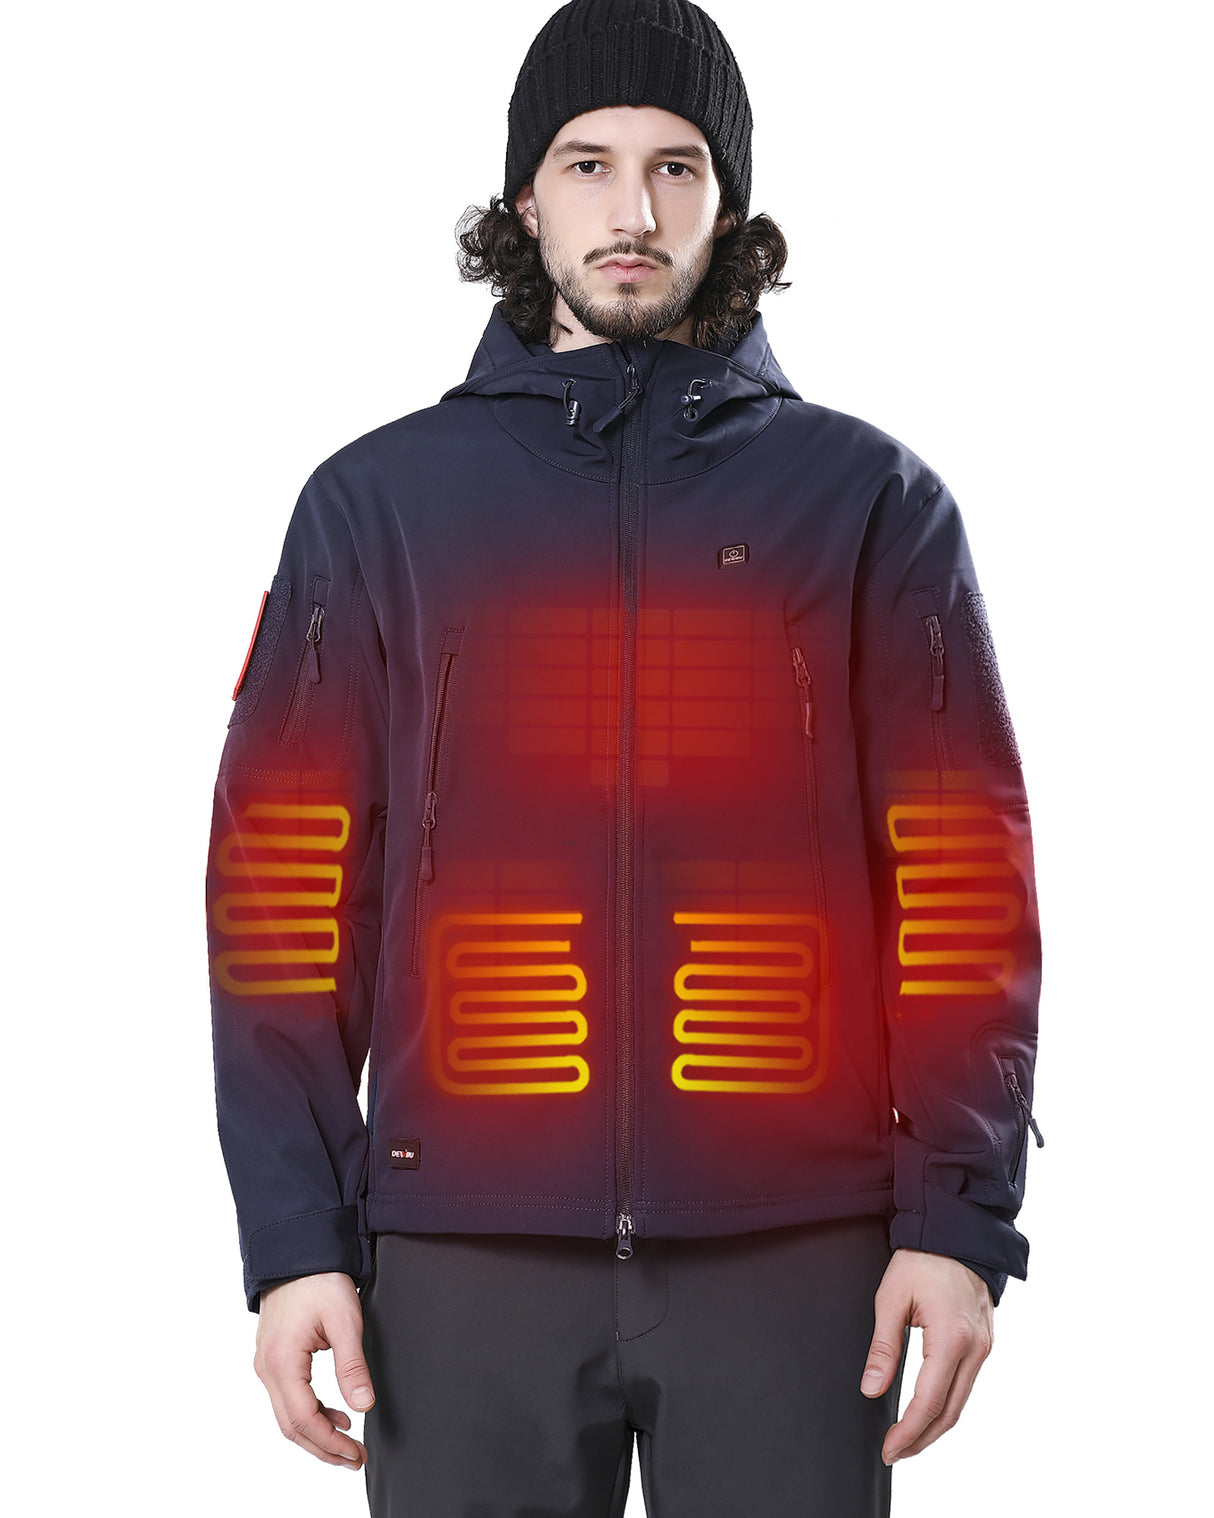 Men's Soft Shell Heated Jacket With 12V Battery Pack - Dark Blue